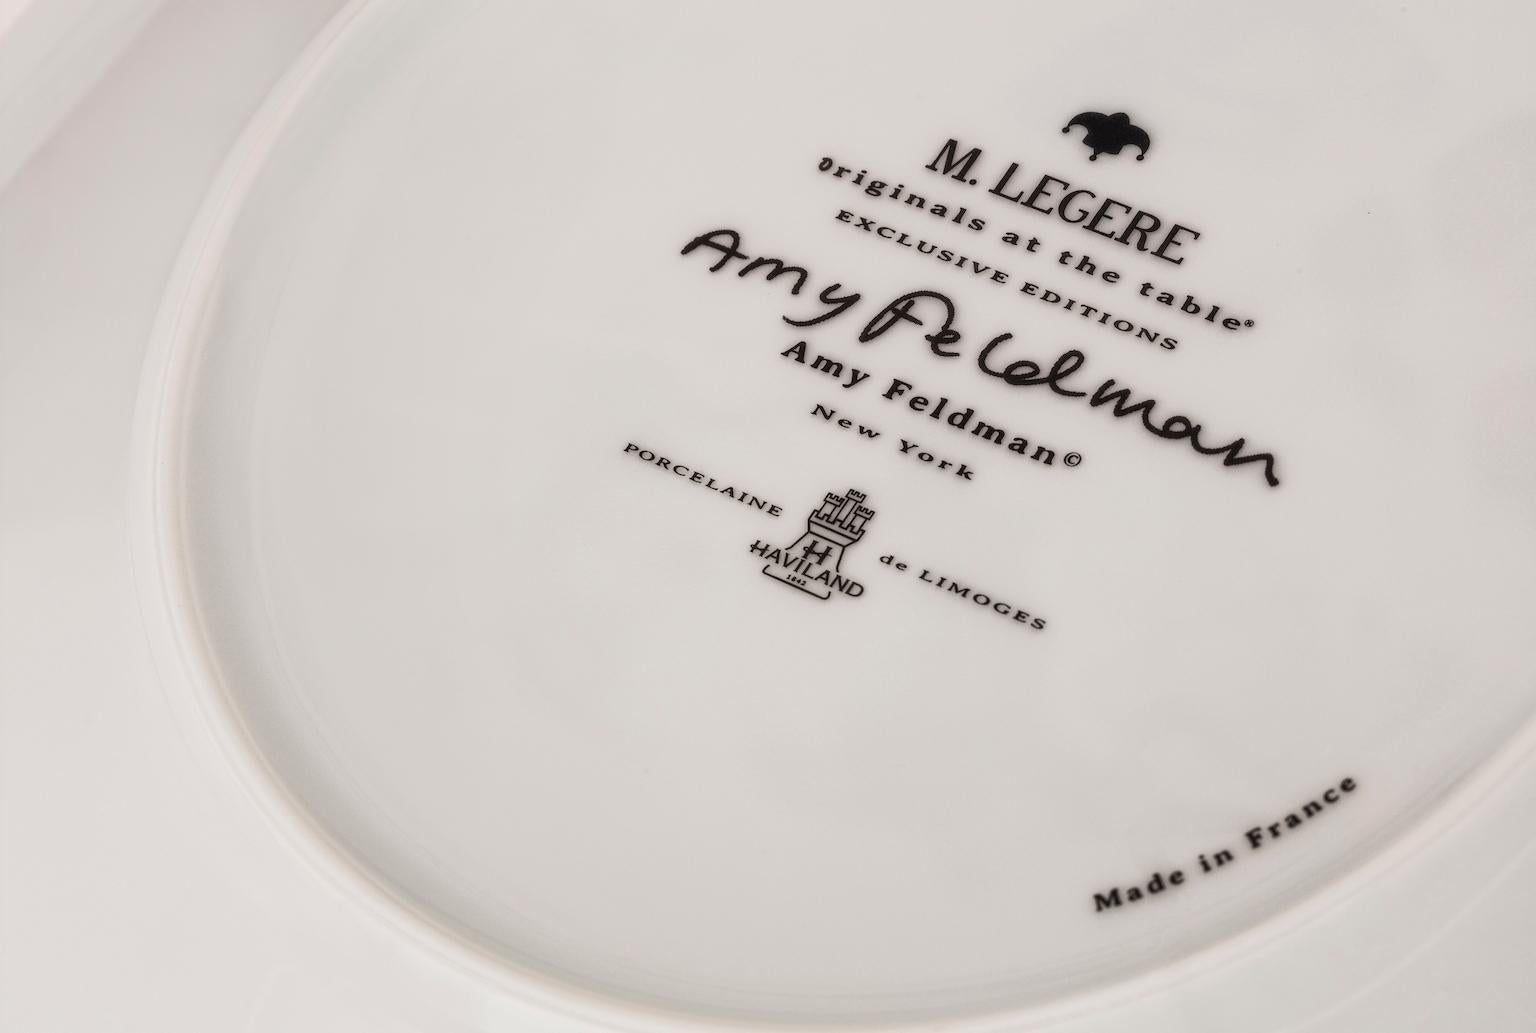 This purposely sized Limoges white dessert plate features a pulsating painting rendered in inky black and silvery gray exclusively for M.Legere by Brooklyn NYC female abstract Artist Amy Feldman and is dishwater safe. Haviland, Limoges France's